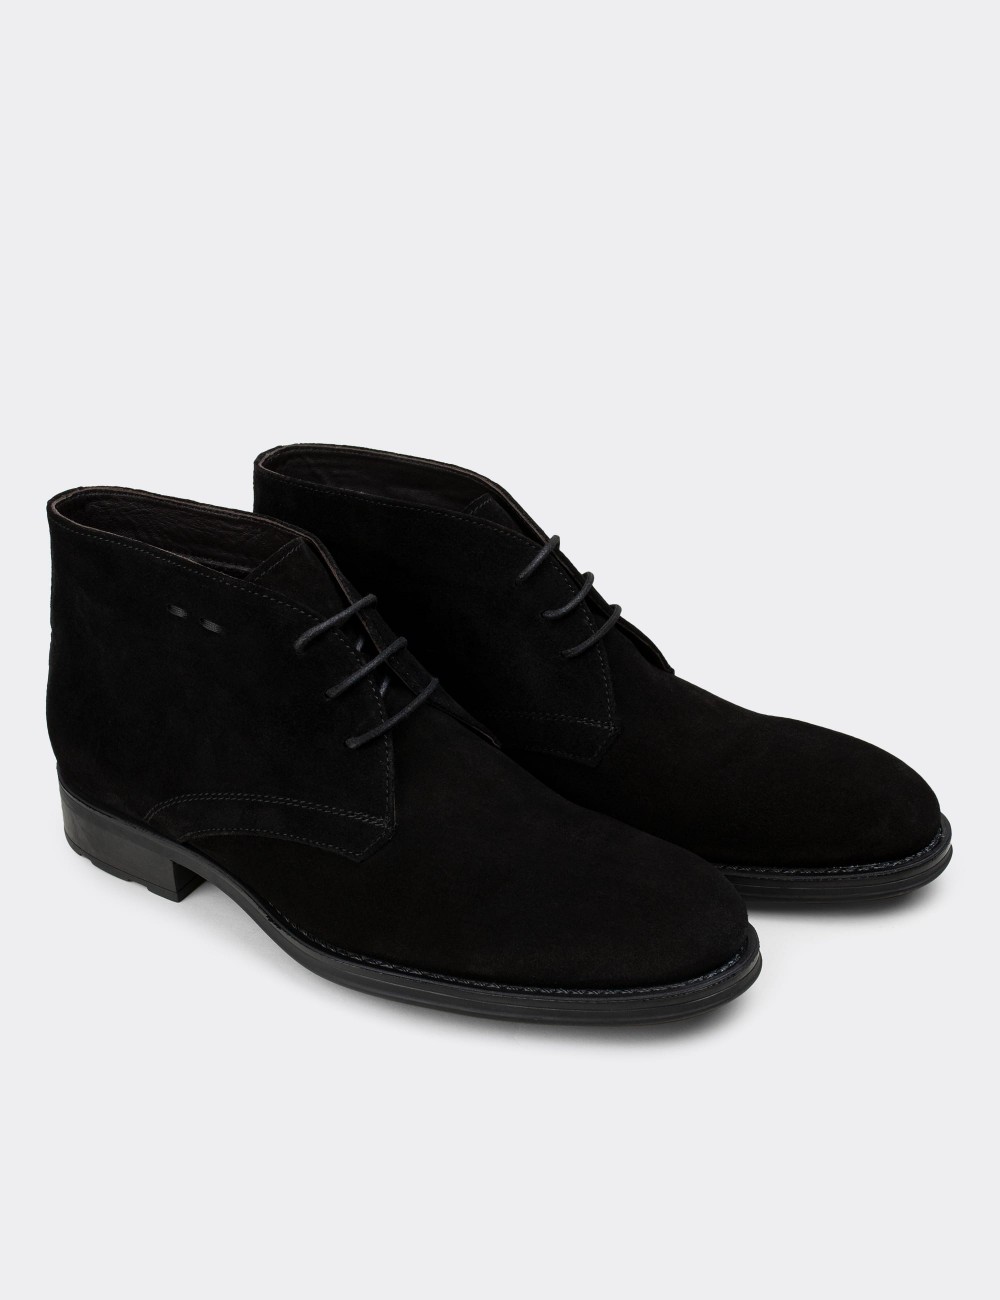 Black Suede Leather Boots - 01295MSYHC09